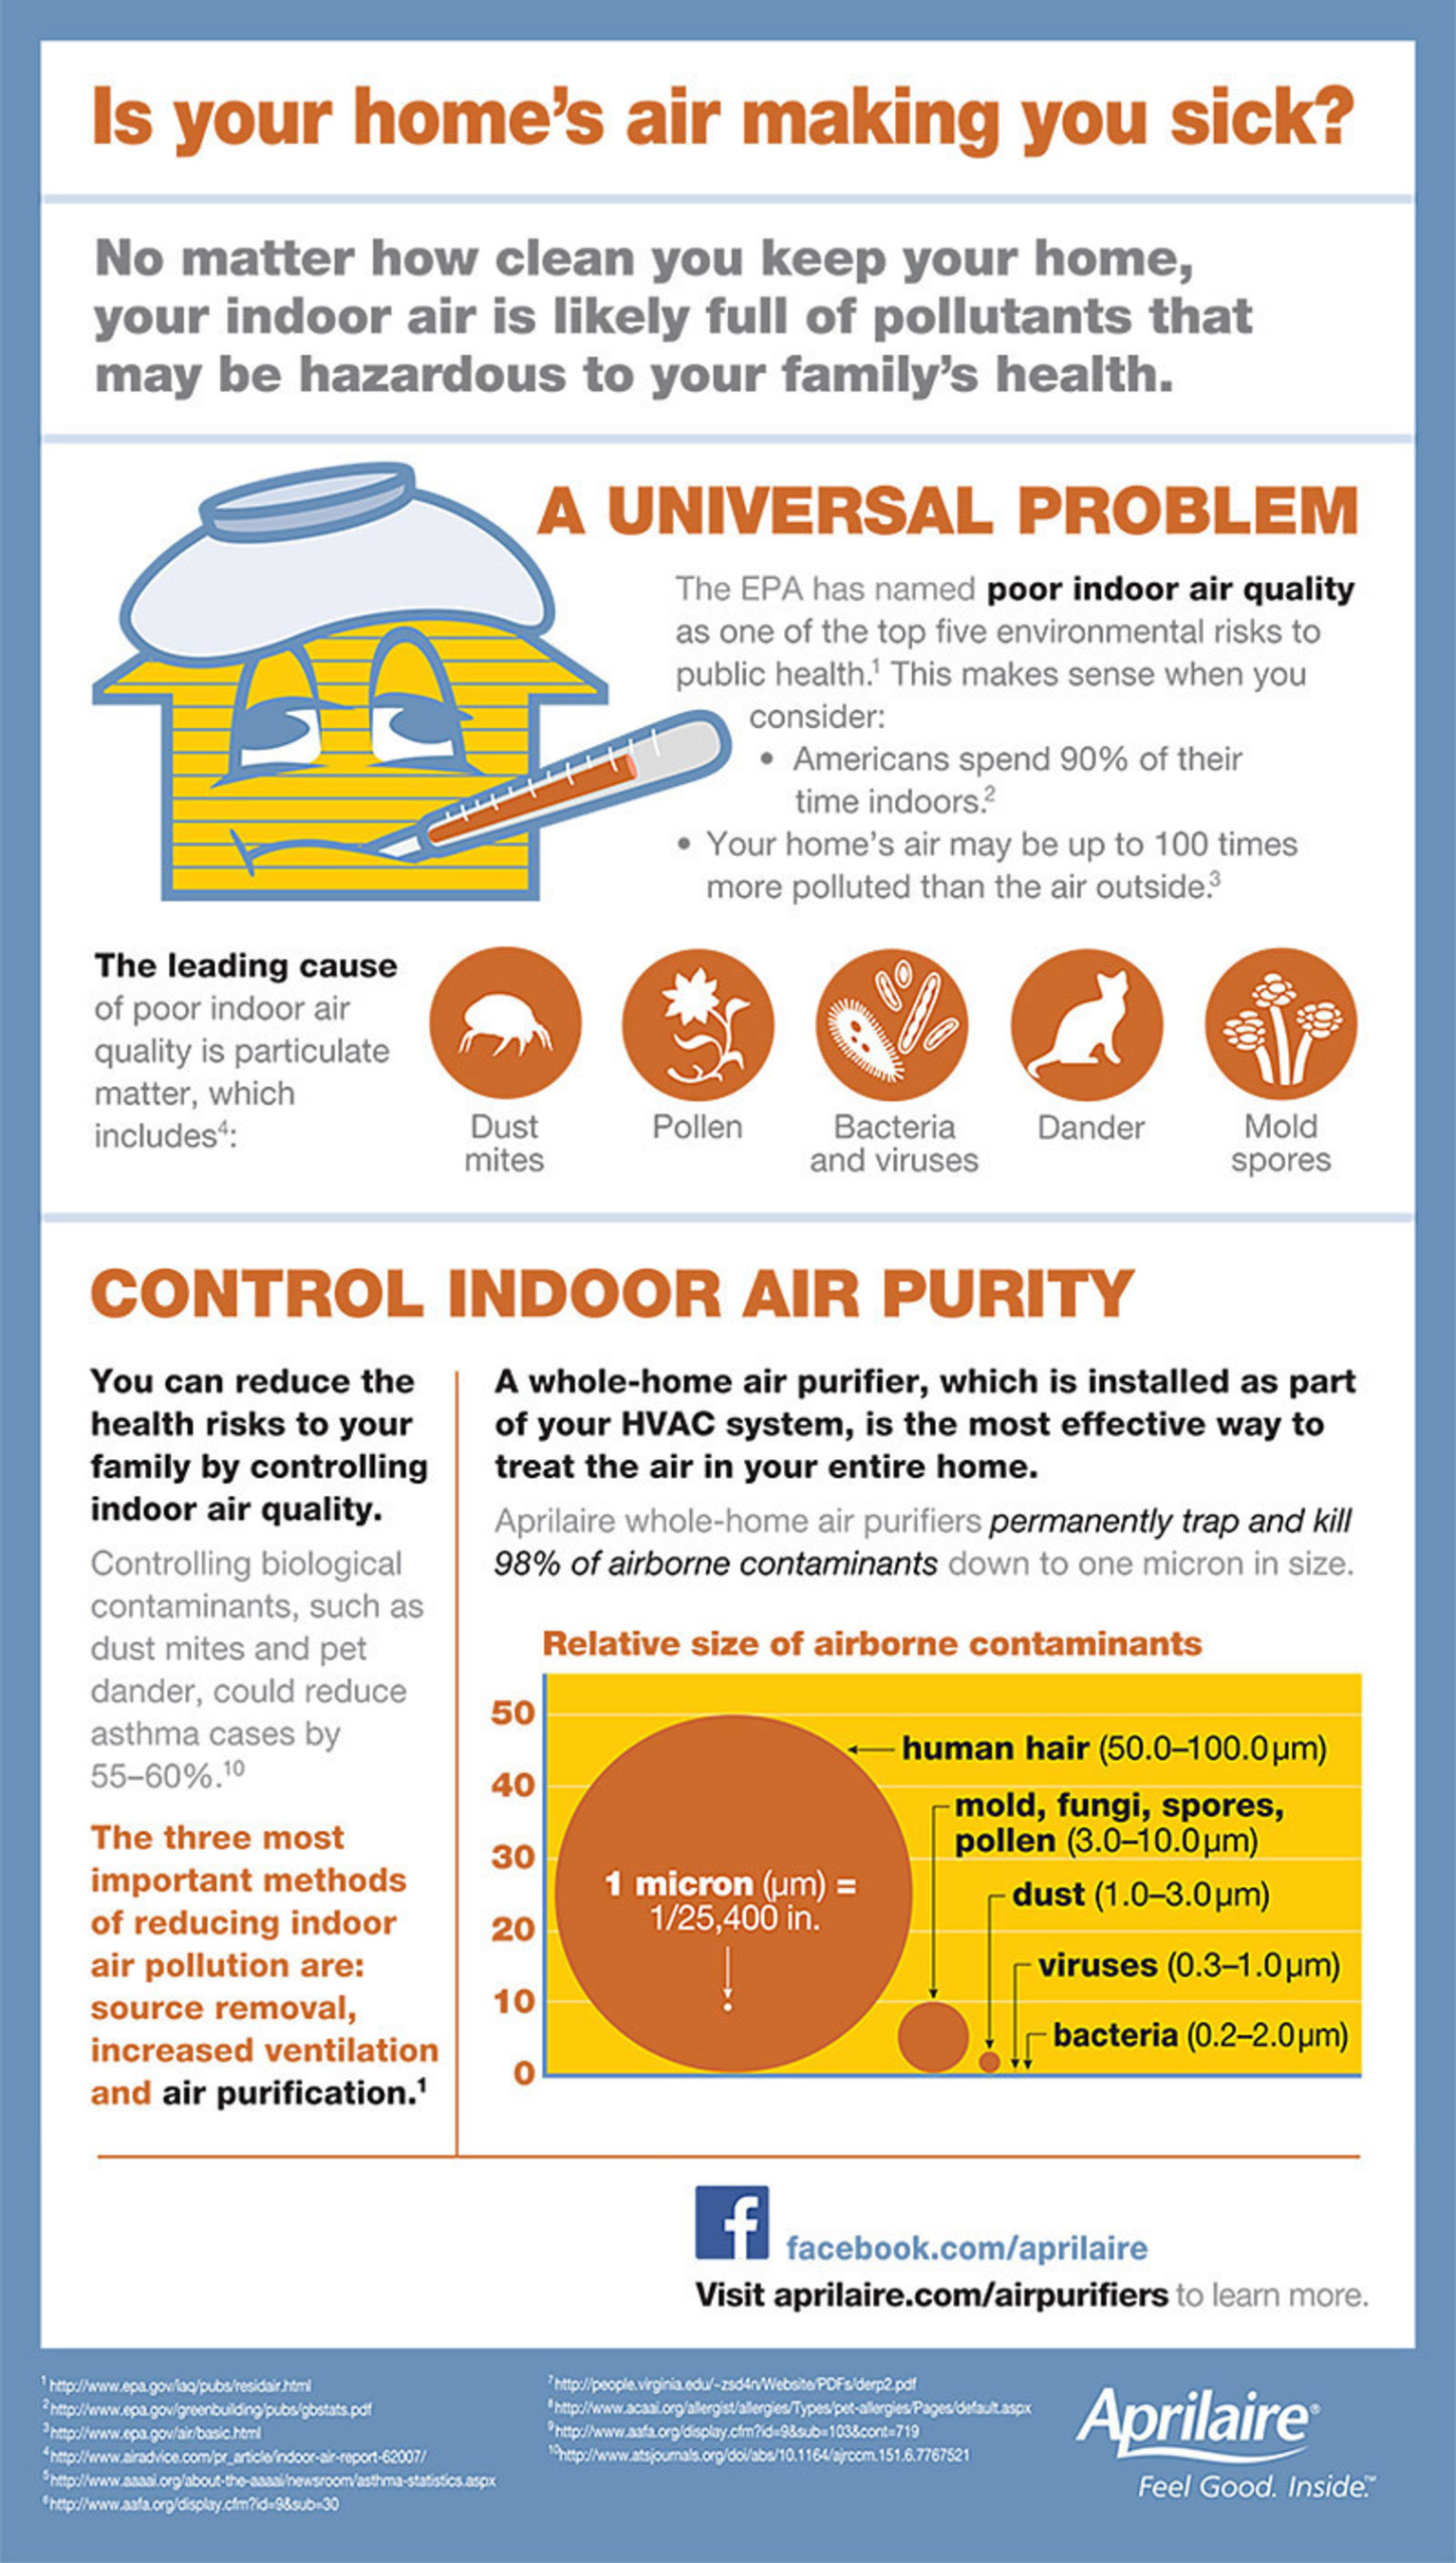 No matter how clean you keep your home, your indoor air is likely full of pollutants that may be hazardous to your family's health. You can reduce the health risks to your family by controlling indoor air quality. Controlling biological contaminants, such as dust mites and pet dander, could reduce asthma cases by 55-60%. (PRNewsFoto/Aprilaire)